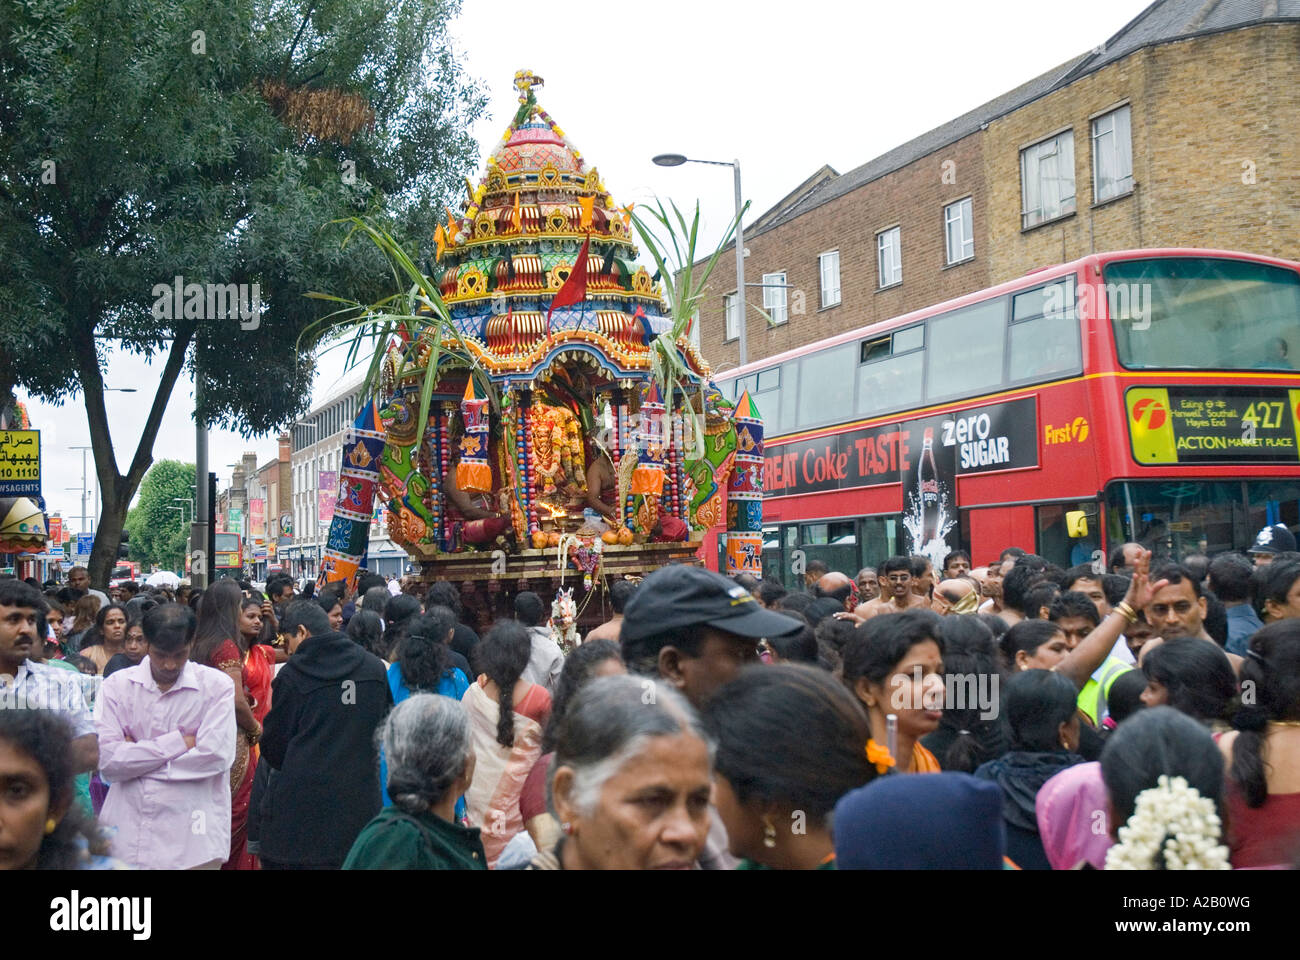 The Chariot from the Sri Kanaga Thurkai Amman Temple the annual Chariot Festival West Ealing London Stock Photo